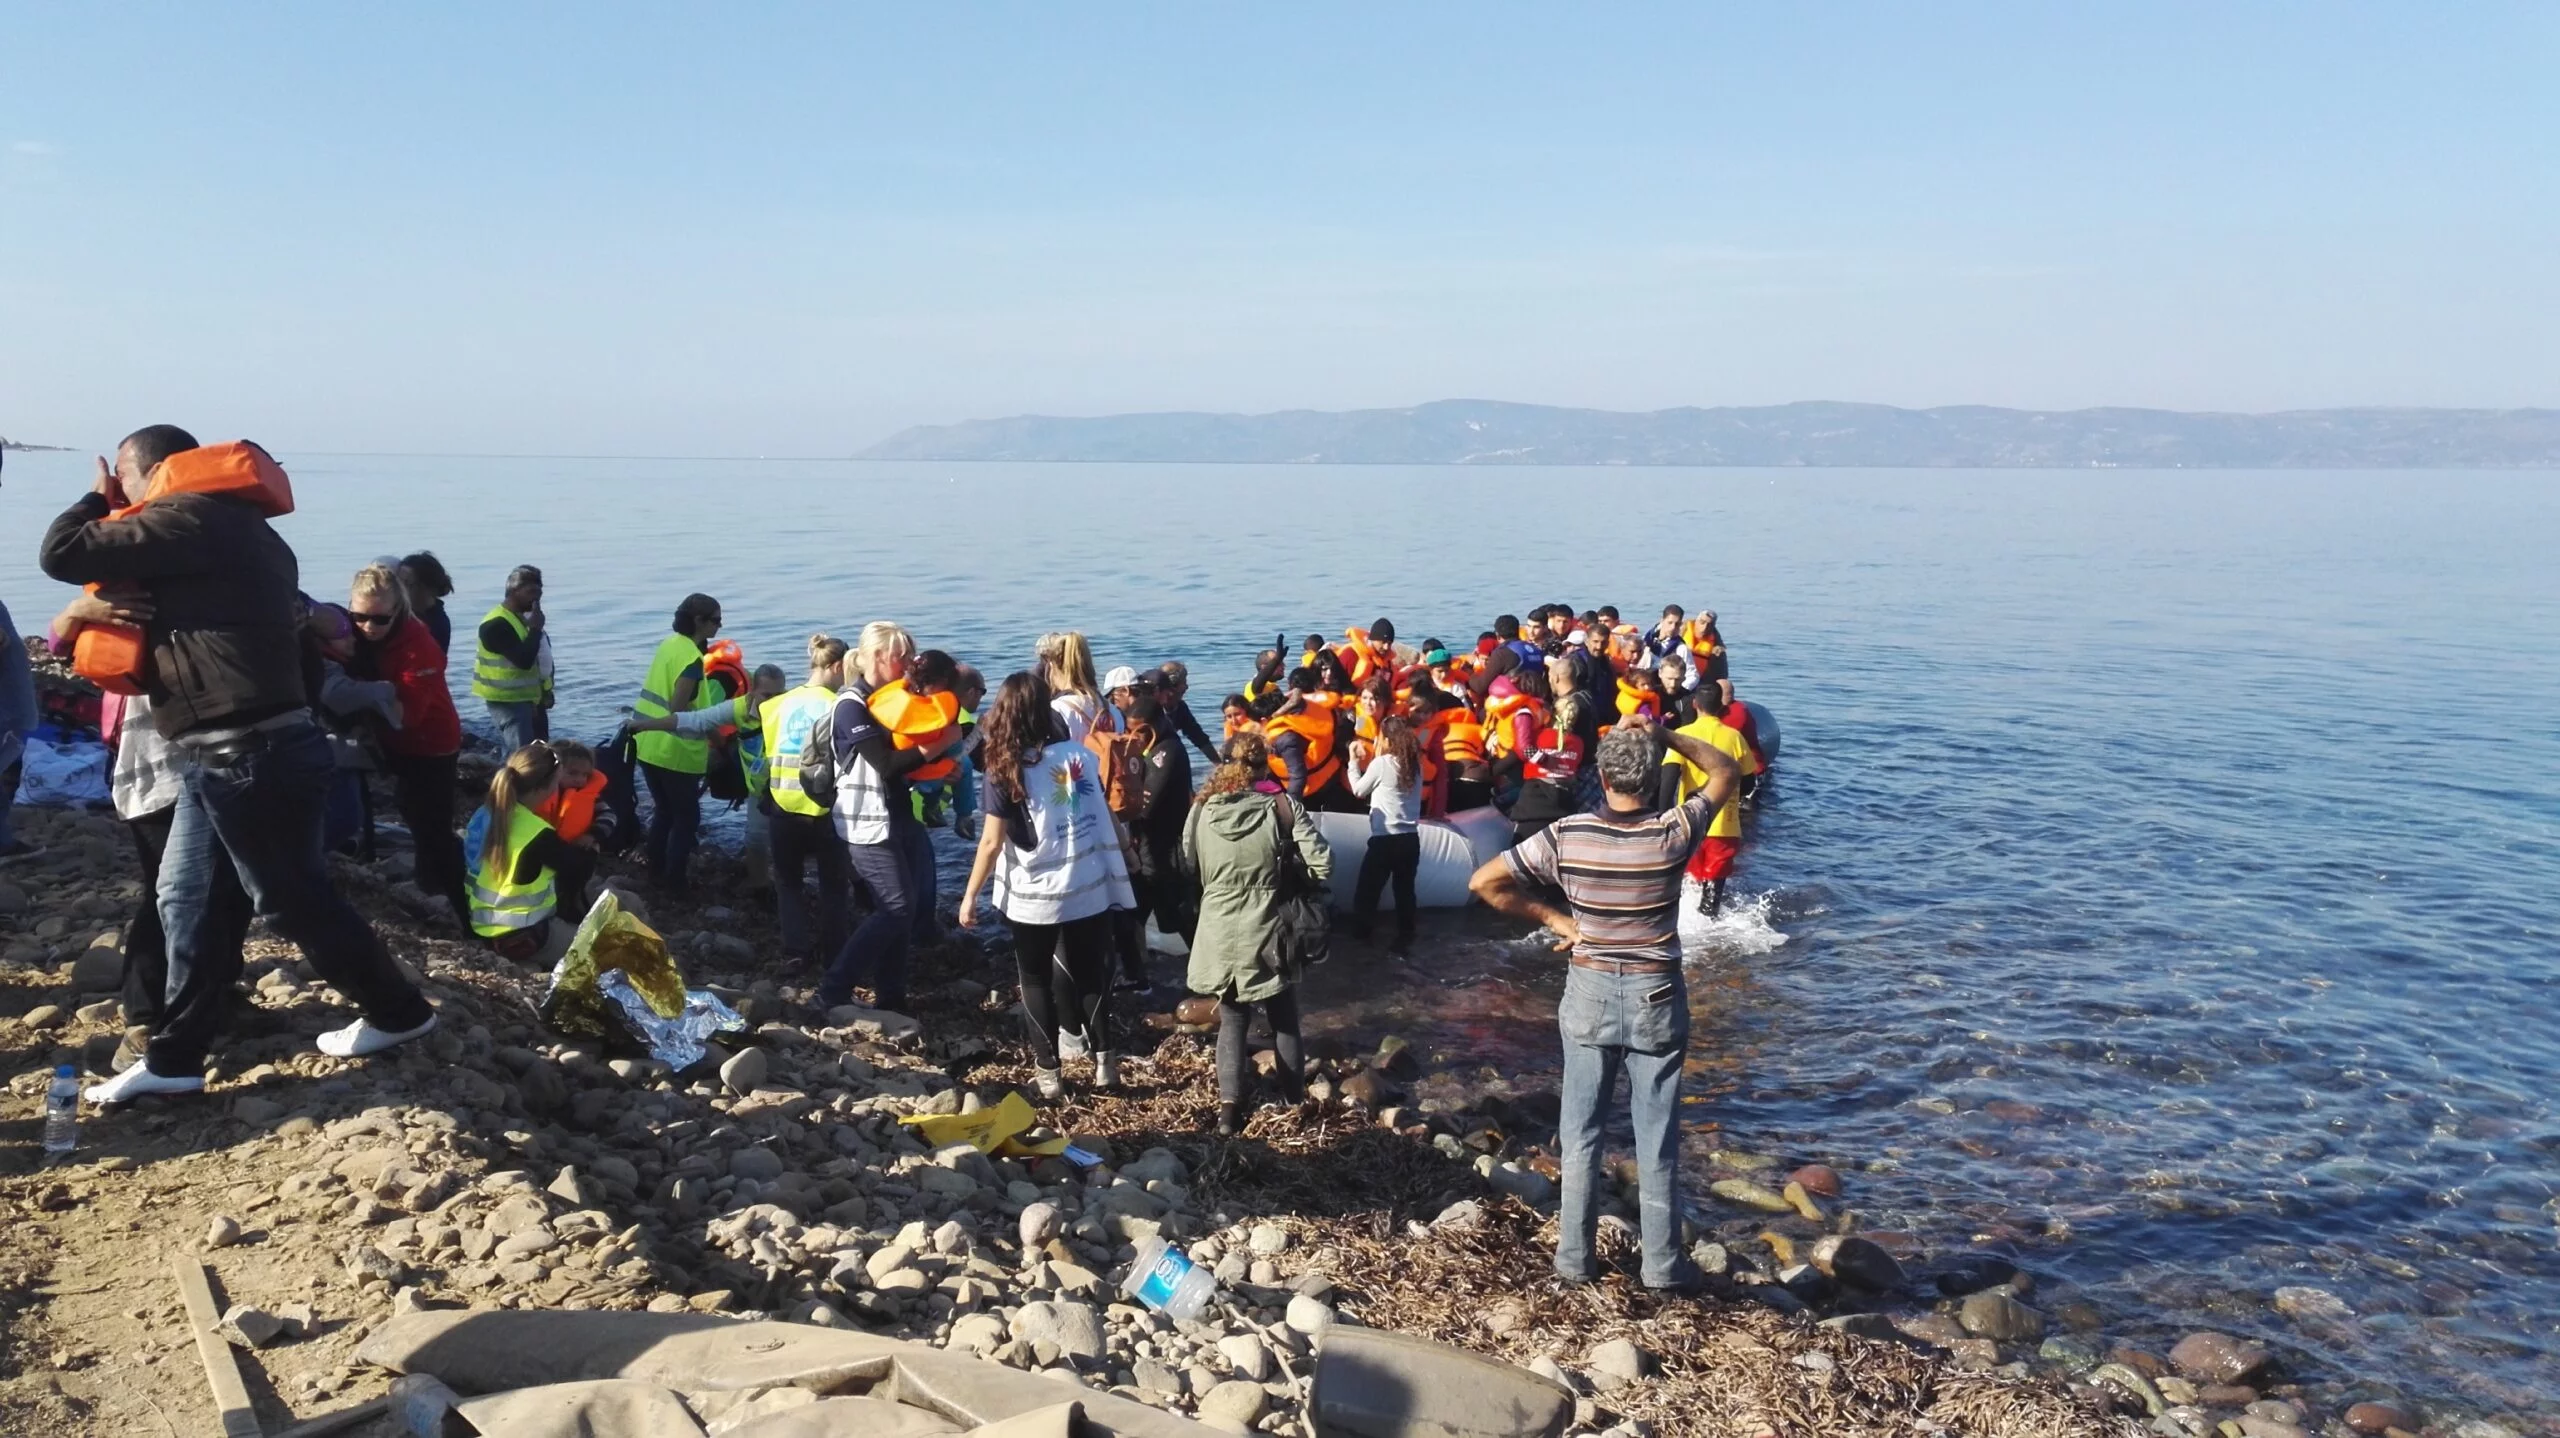 Refugees rescued from boat on Lesvos